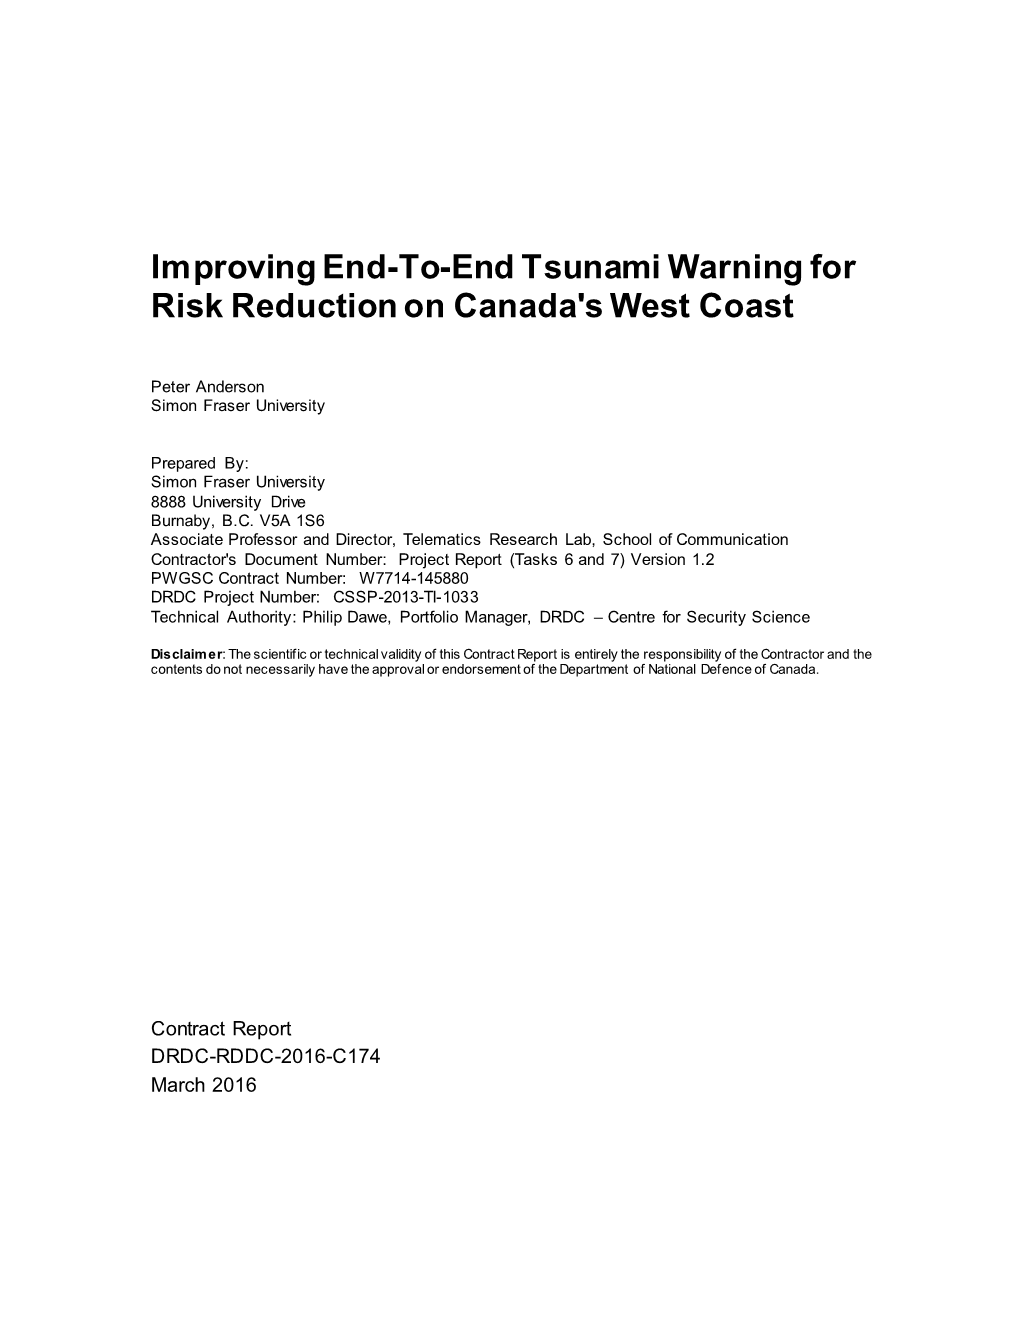 Improving End-To-End Tsunami Warning for Risk Reduction on Canada's West Coast